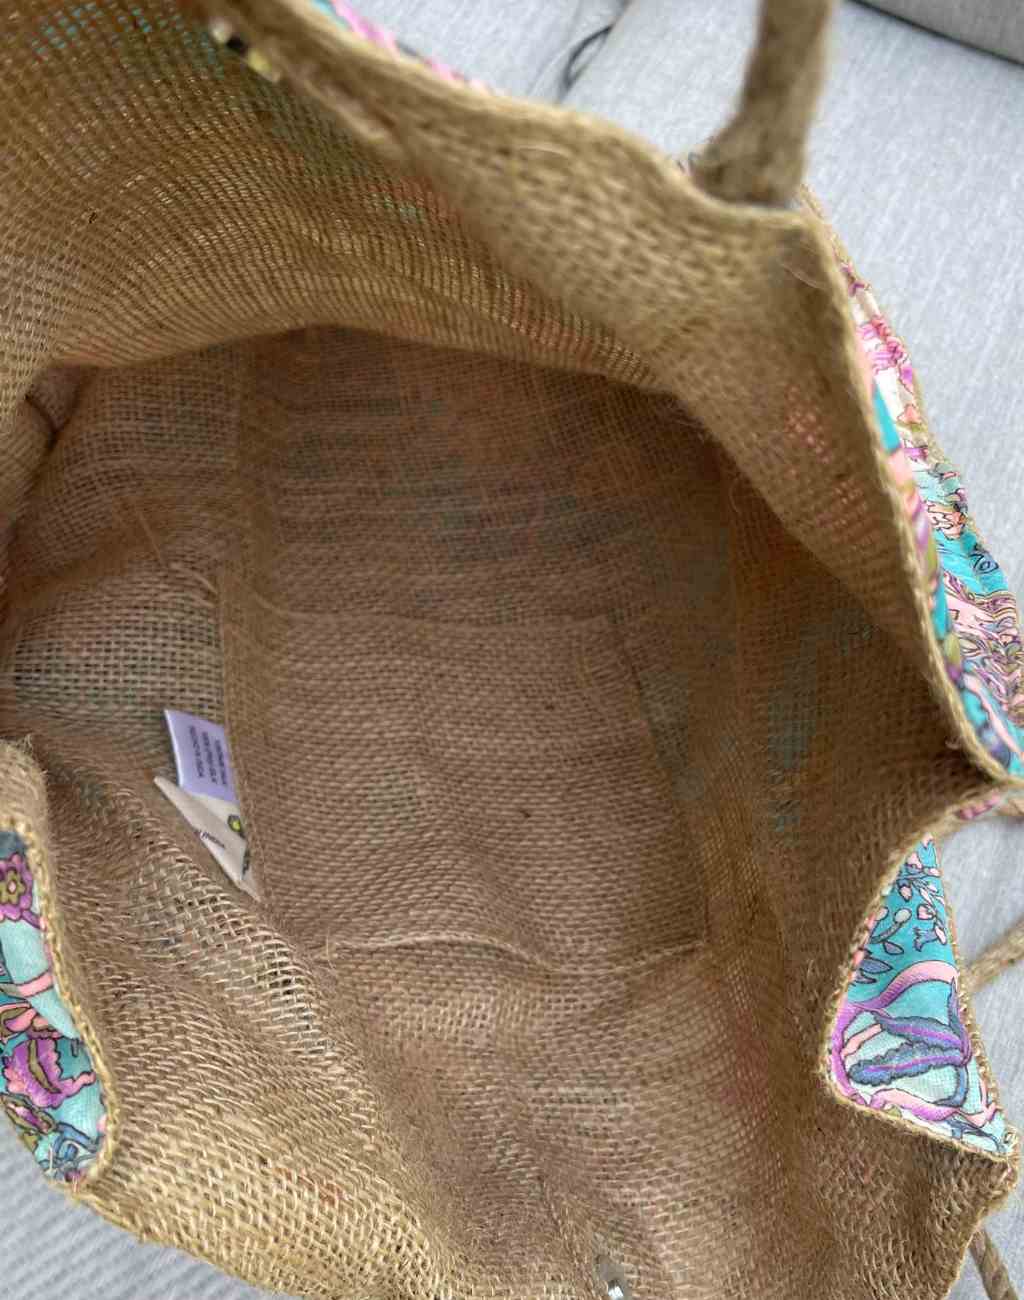 Vintage Silk Covered Jute Tote Bag in Multi Colored Paisley Print - Visit Nifty Nifty 